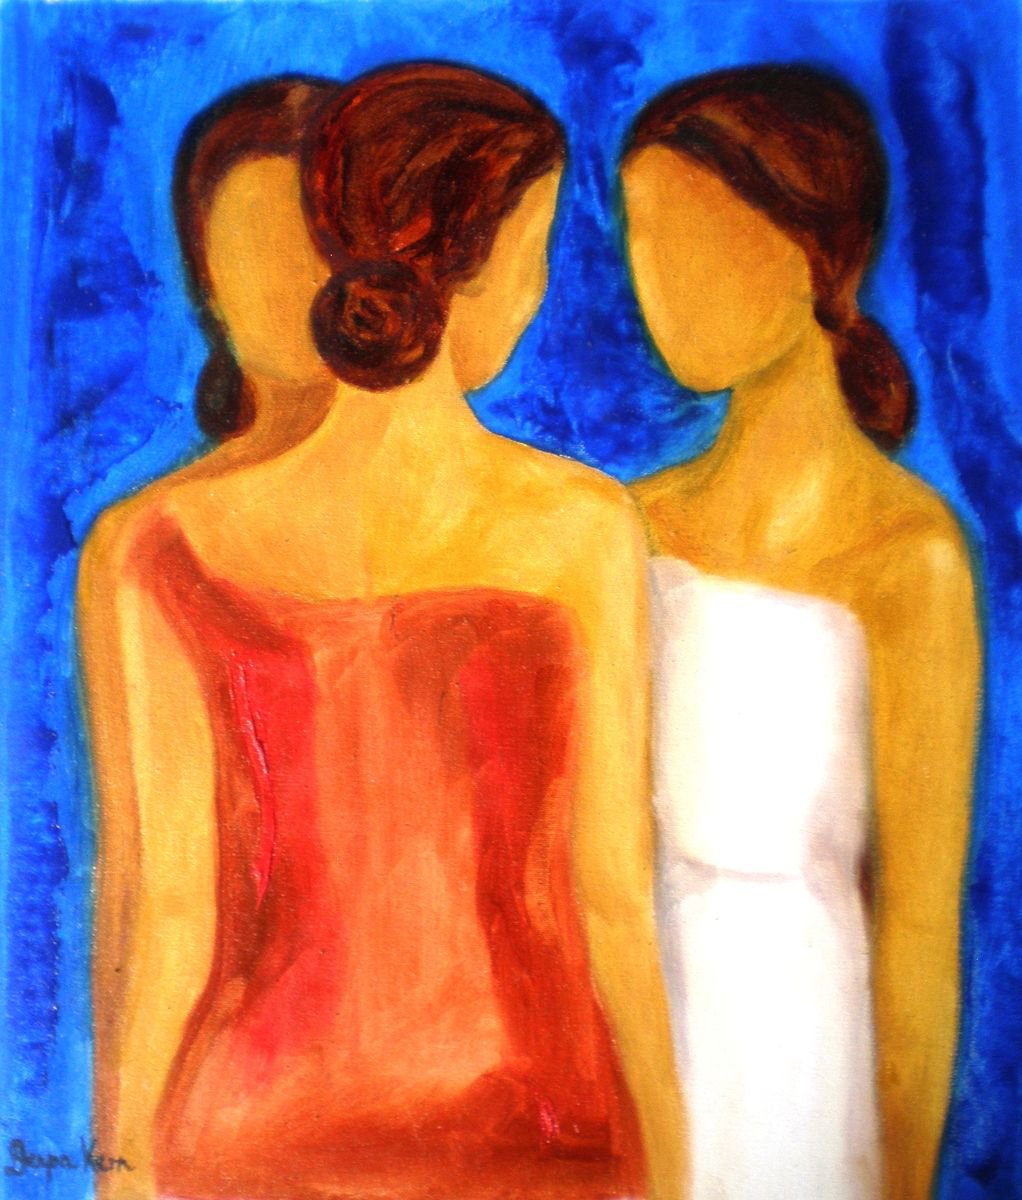 SPECIAL FRIENDS, Impressionist painting by Deepa Kern